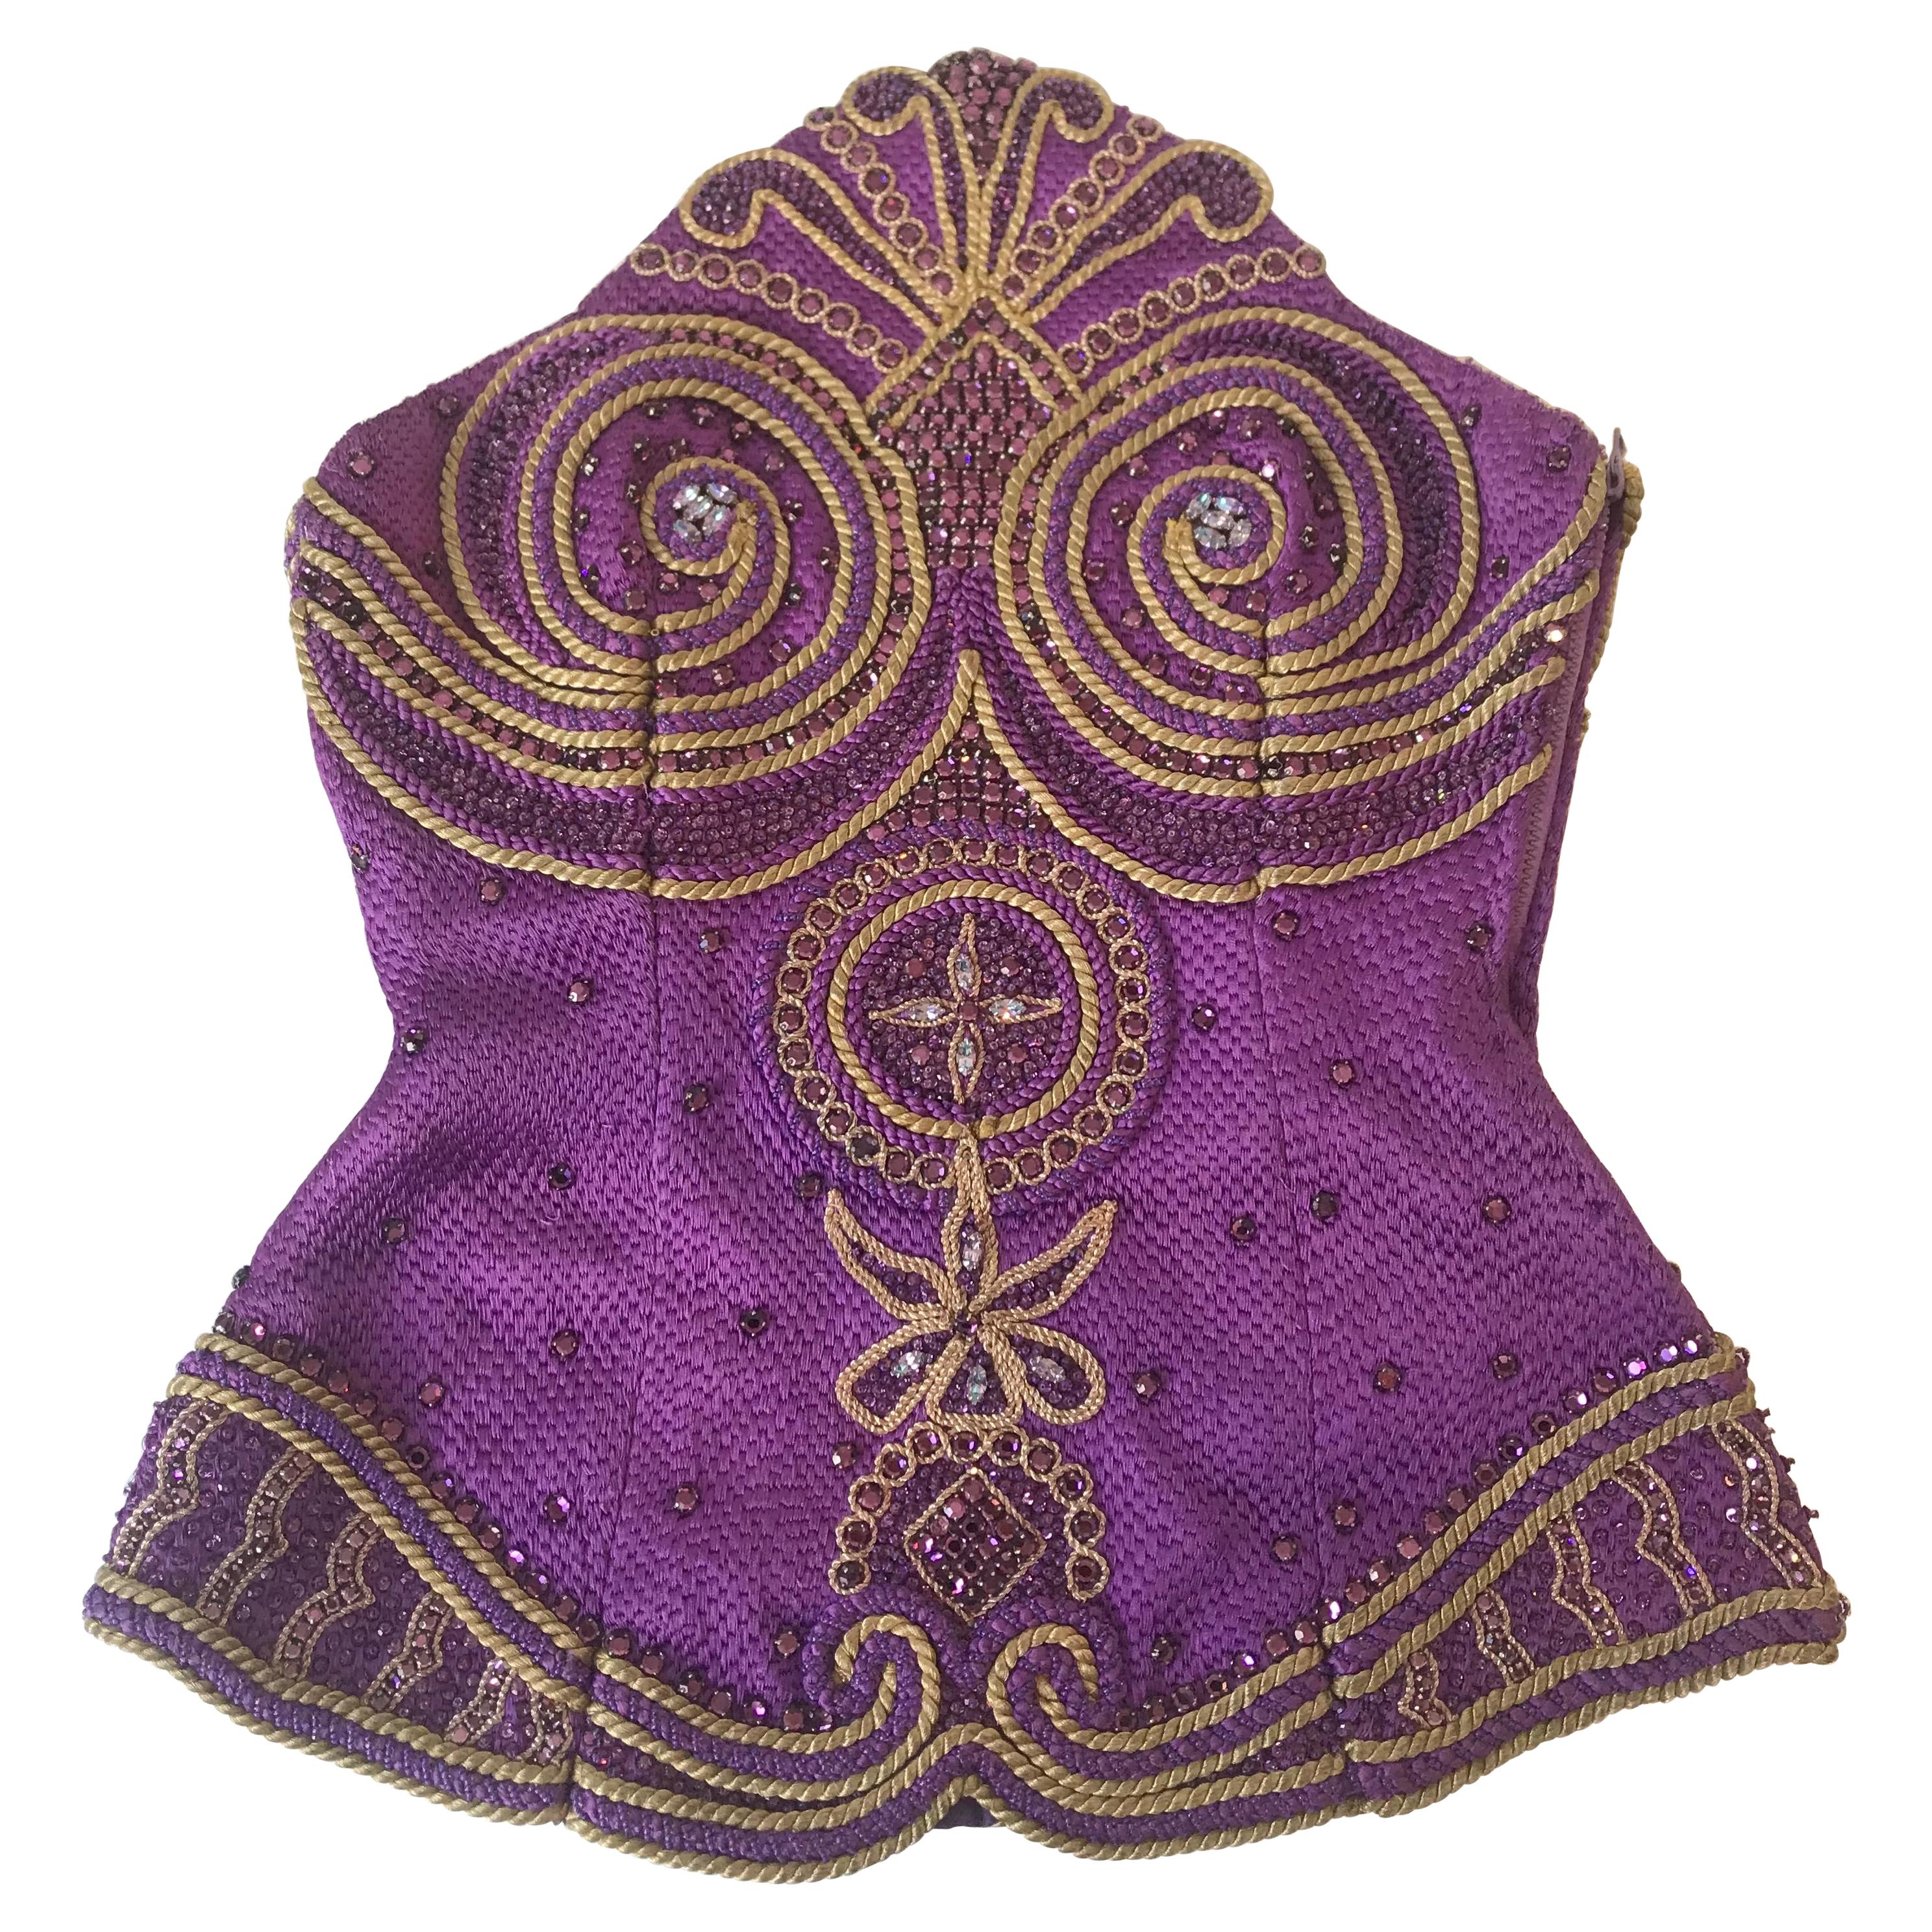 Gianni Versace Couture Purple & Gold Embellished & Embroidered Bustier/Corset